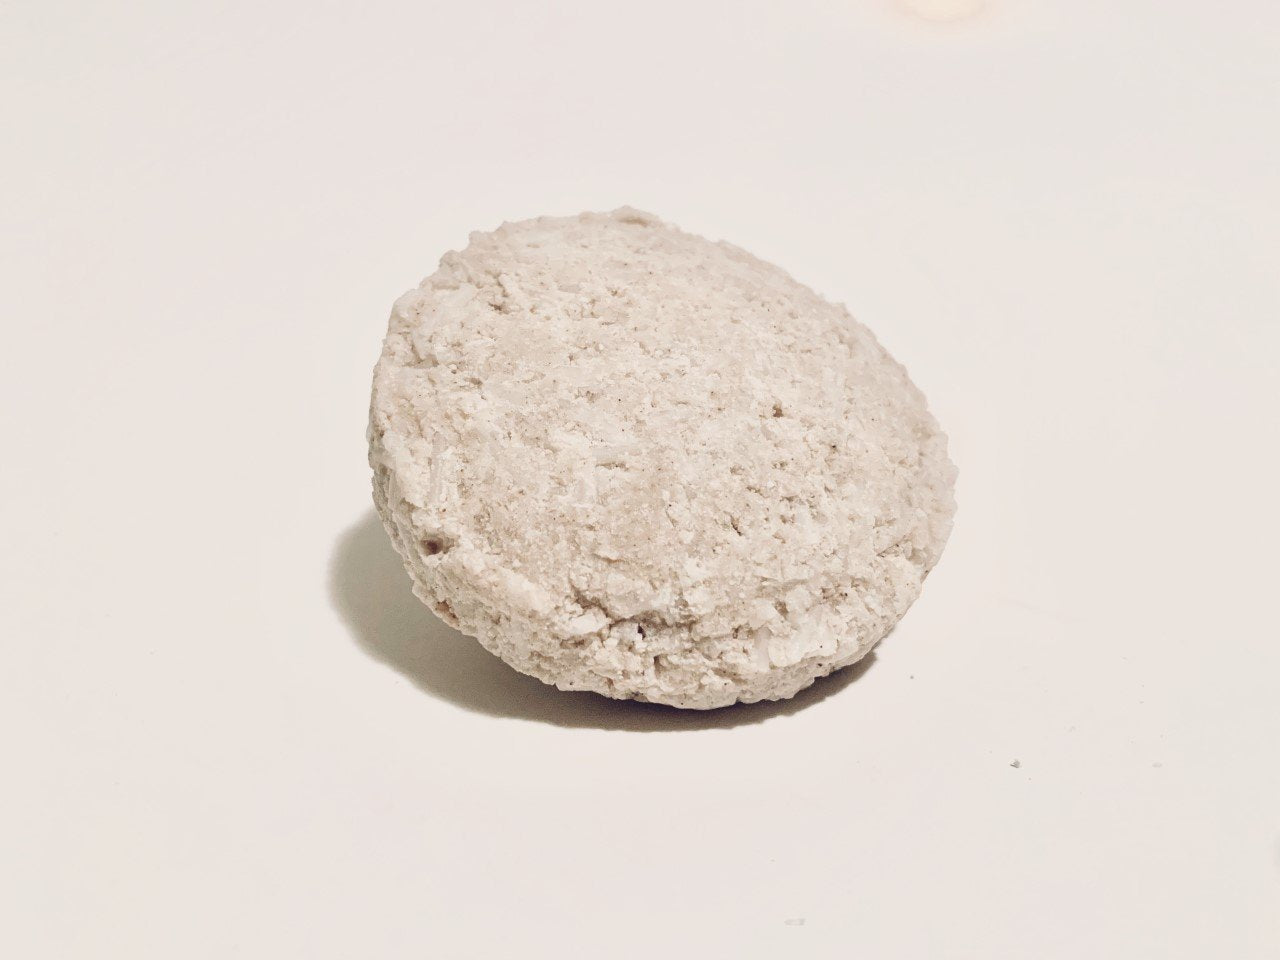 be STRONG Shampoo Bar 60-65g - WHOLESALE be STRONG - nelsonnaturals remineralizing toothpaste